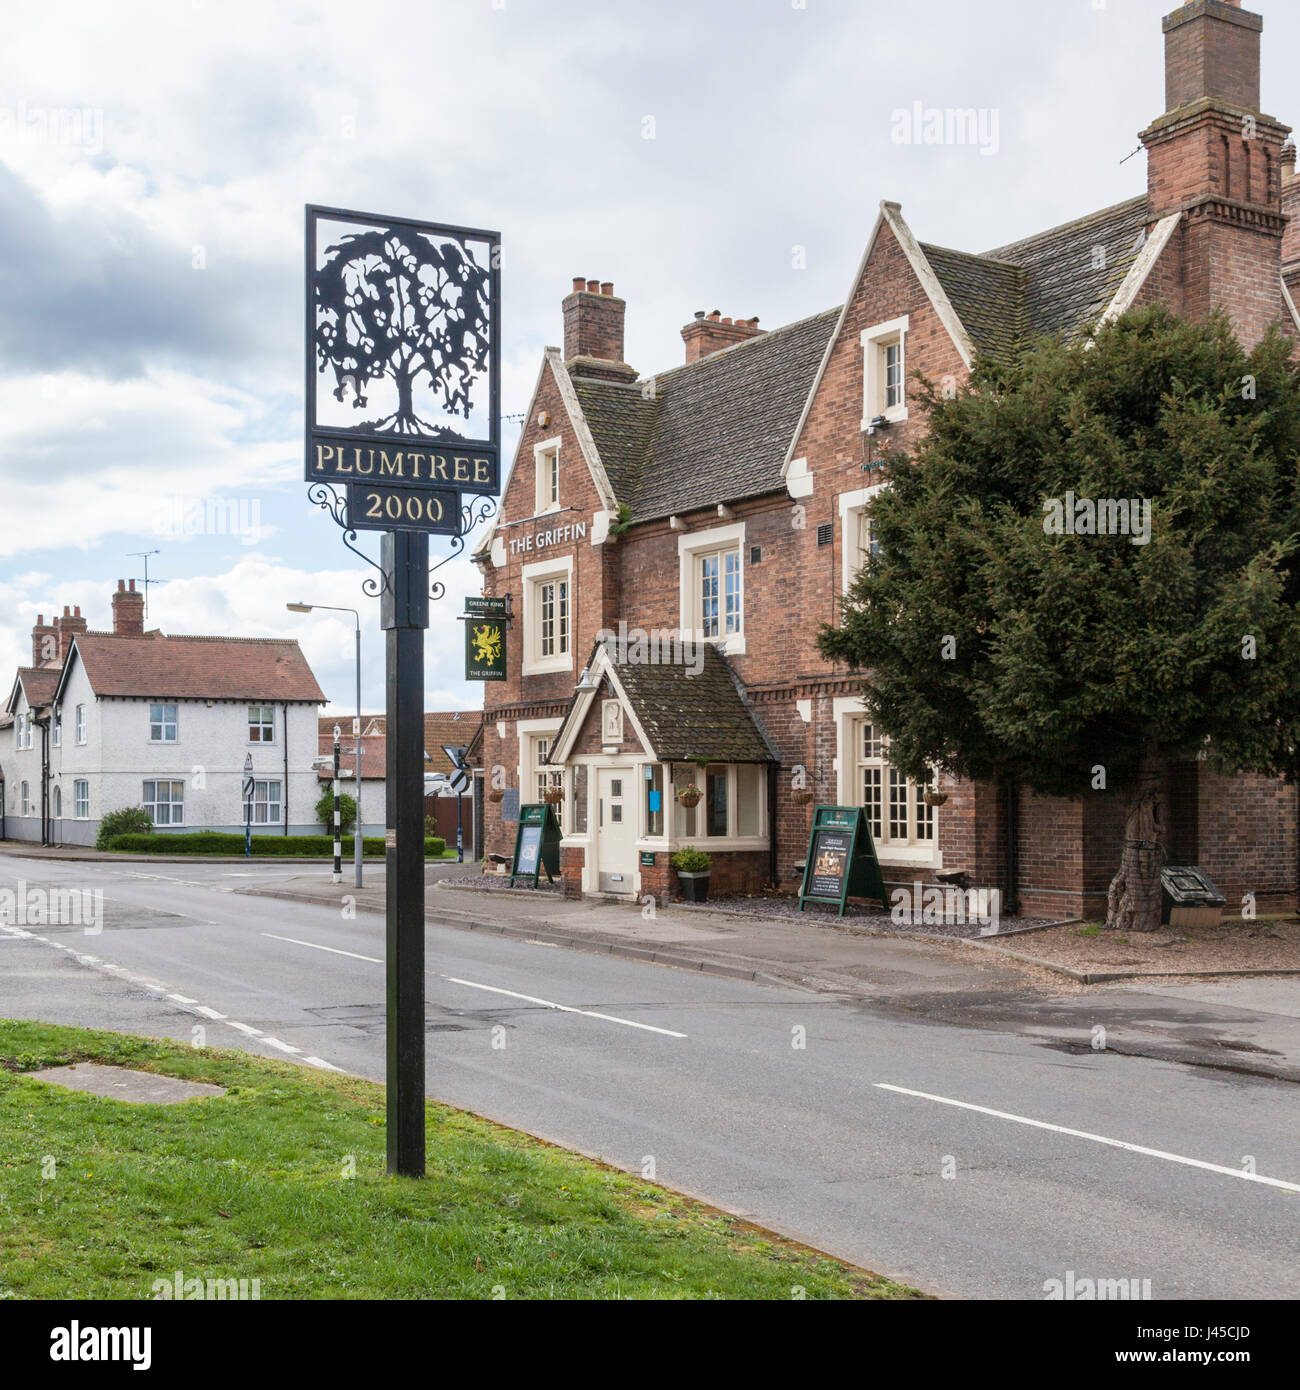 Plumtree village sign with The Griffin pub across the road. Plumtree, Nottinghamshire, England, UK Stock Photo